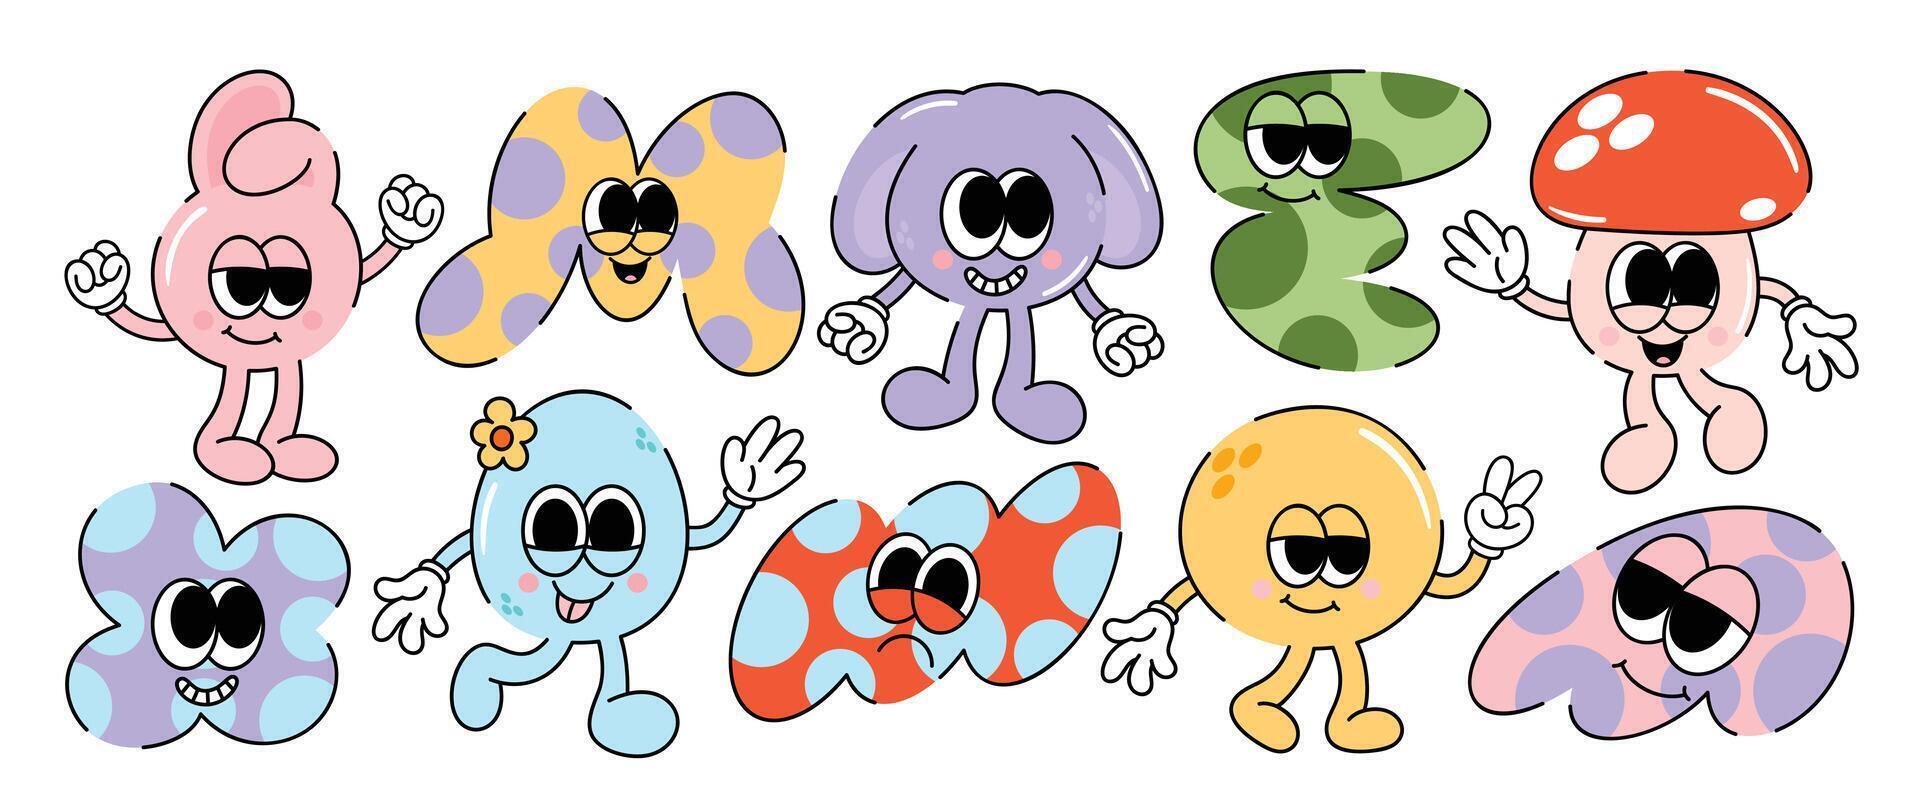 Set of funky groovy element vector. Collection of cartoon characters, doodle smile face, rabbit, mushroom, egg, sparkle. Cute retro groovy hippie design for decorative, sticker, kids, clipart. vector